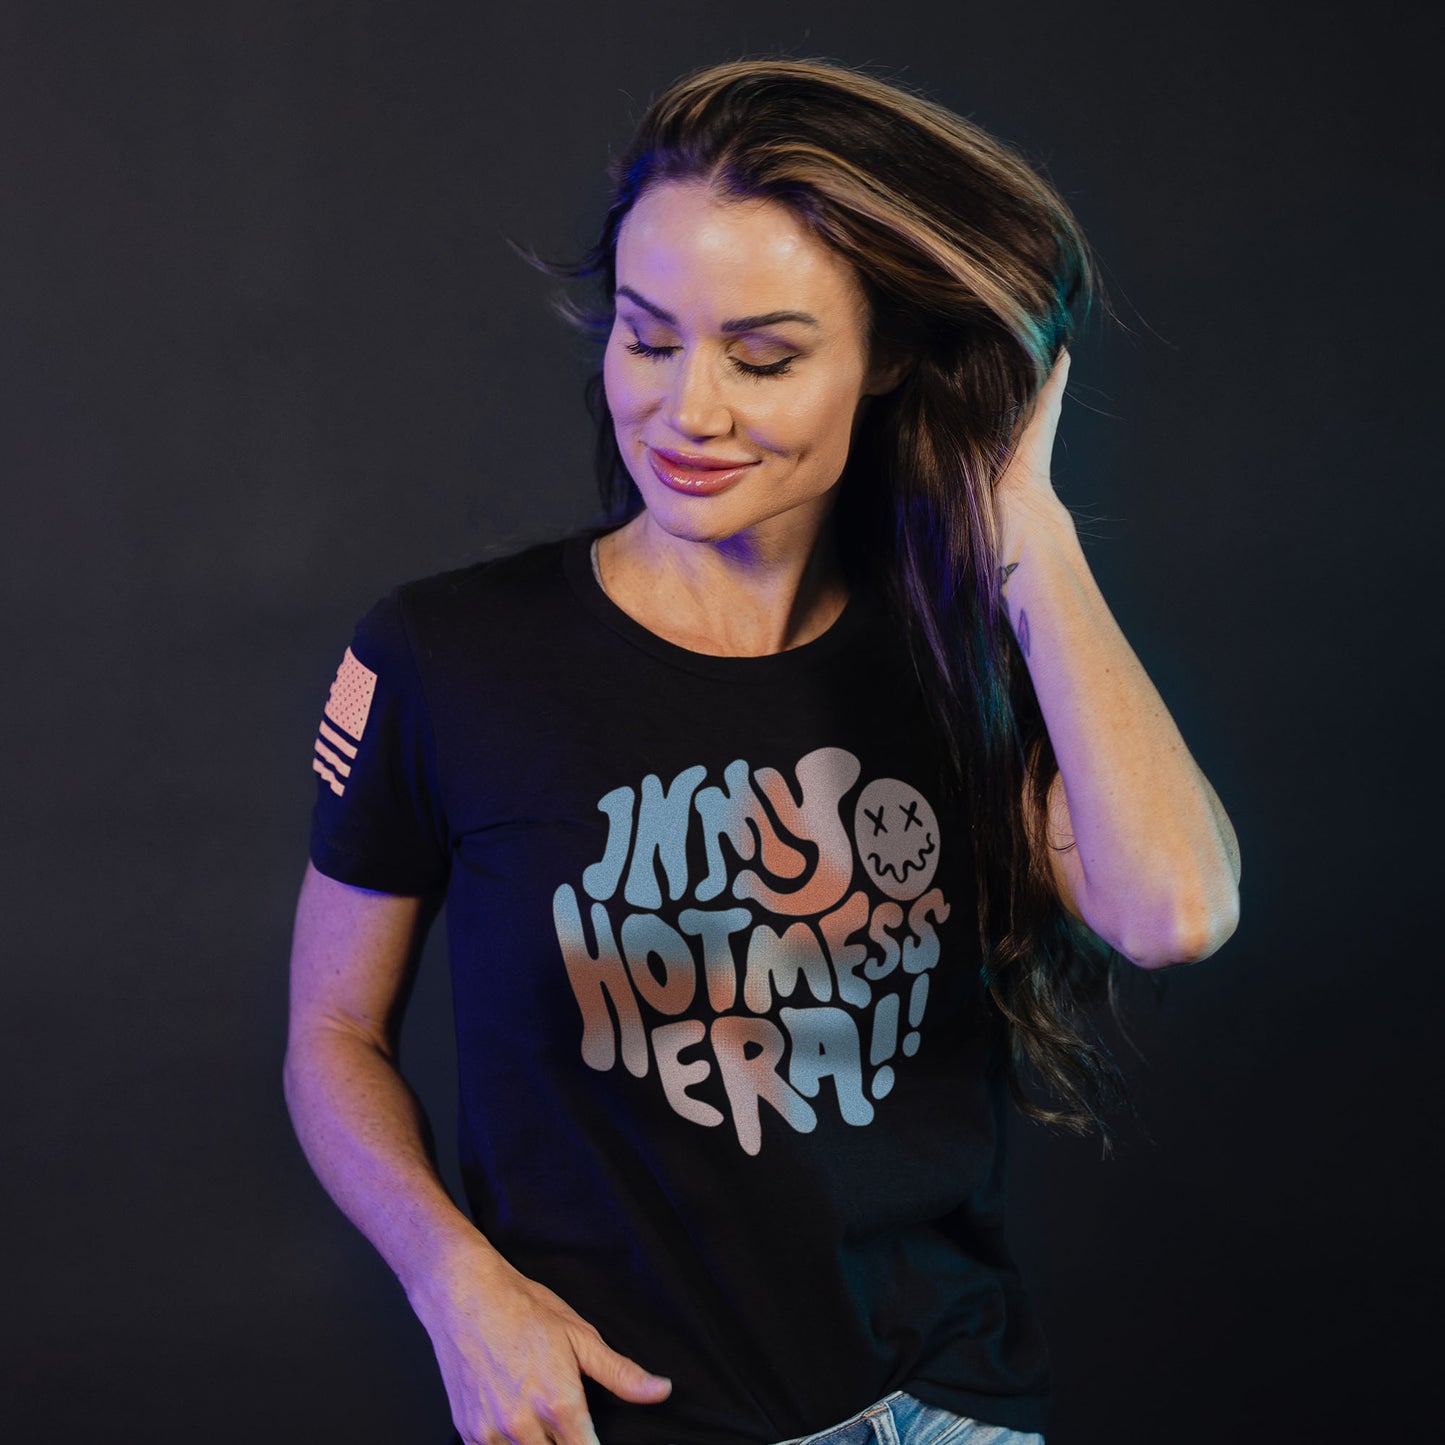 Hot Mess - Funny Shirts for Women 